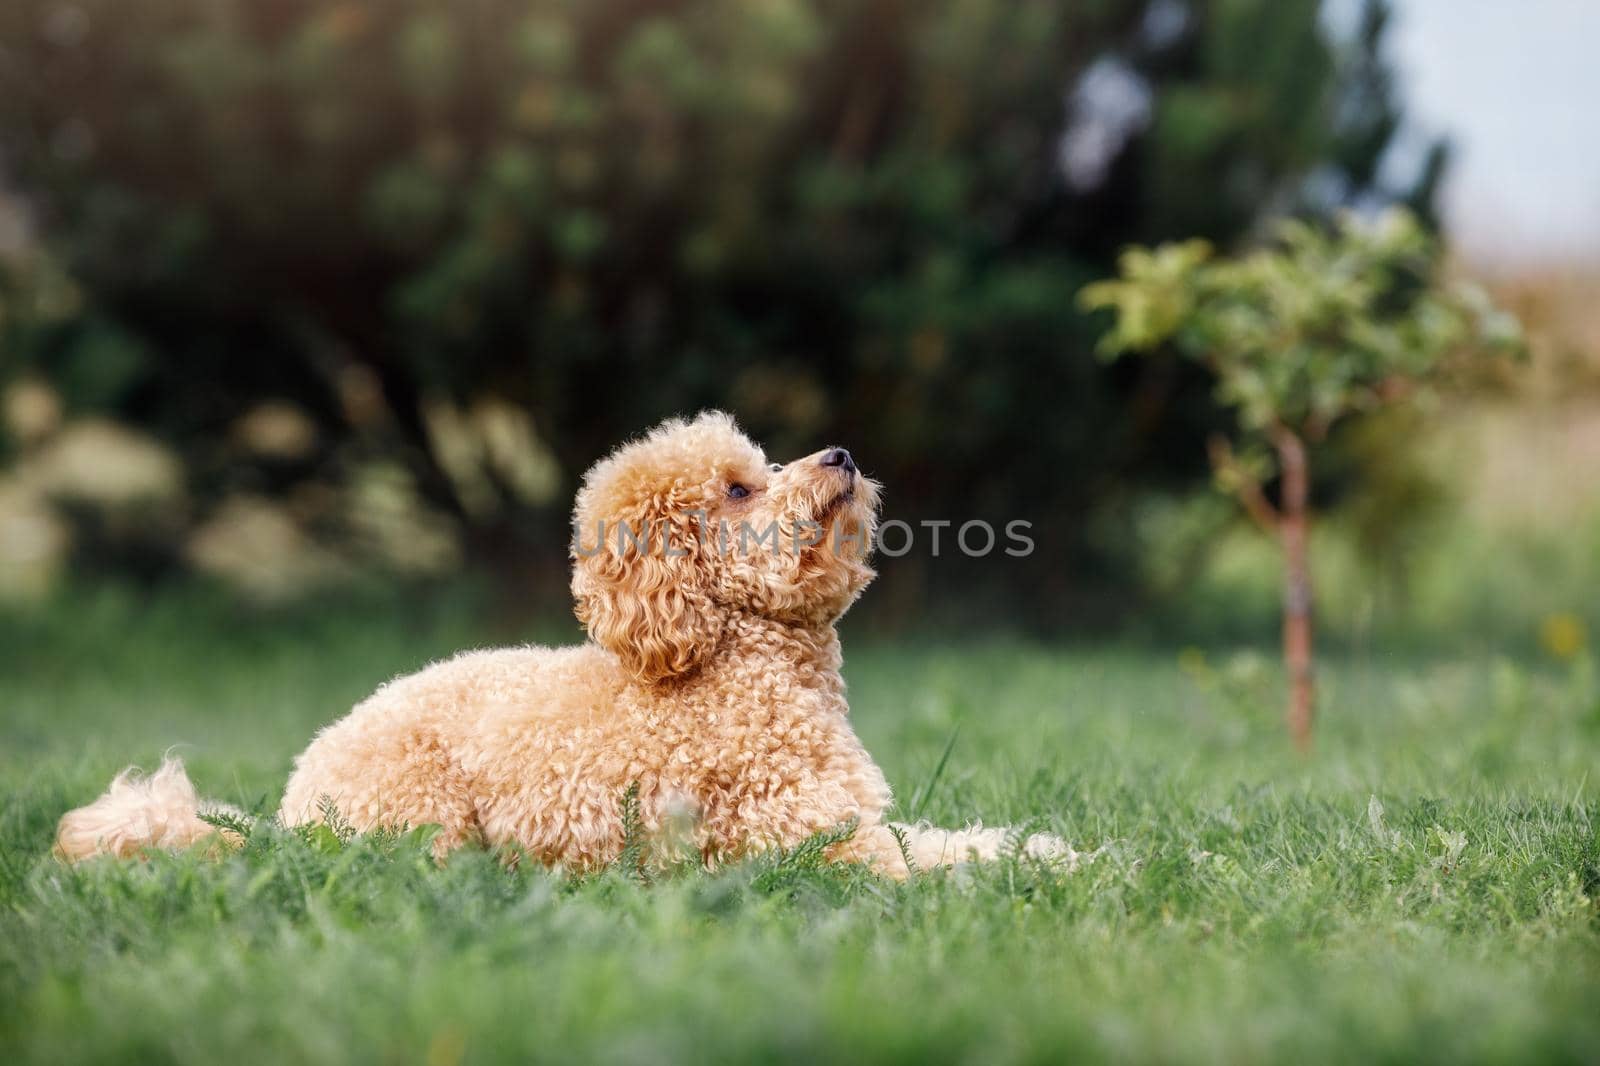 Poodle lie on the grass he looks up and awaiting instructions from his owner. by Lincikas